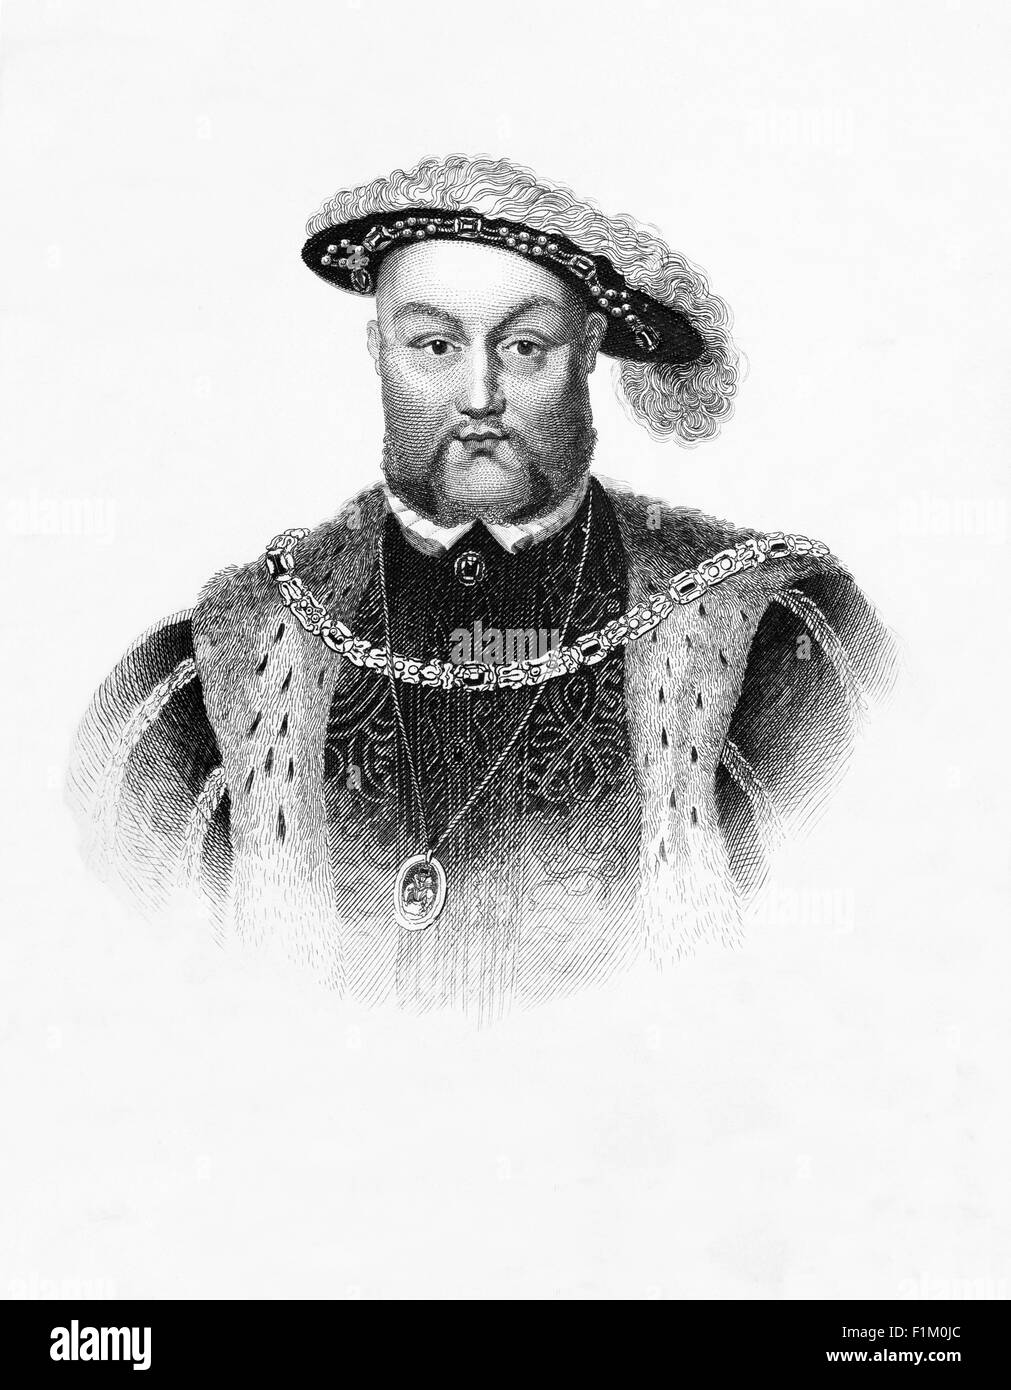 King Henry VIII 1491 - 1547 who broke away from the Catholic Church and proclaimed himself head of the Church of England. Also famous for his six wives. Stock Photo